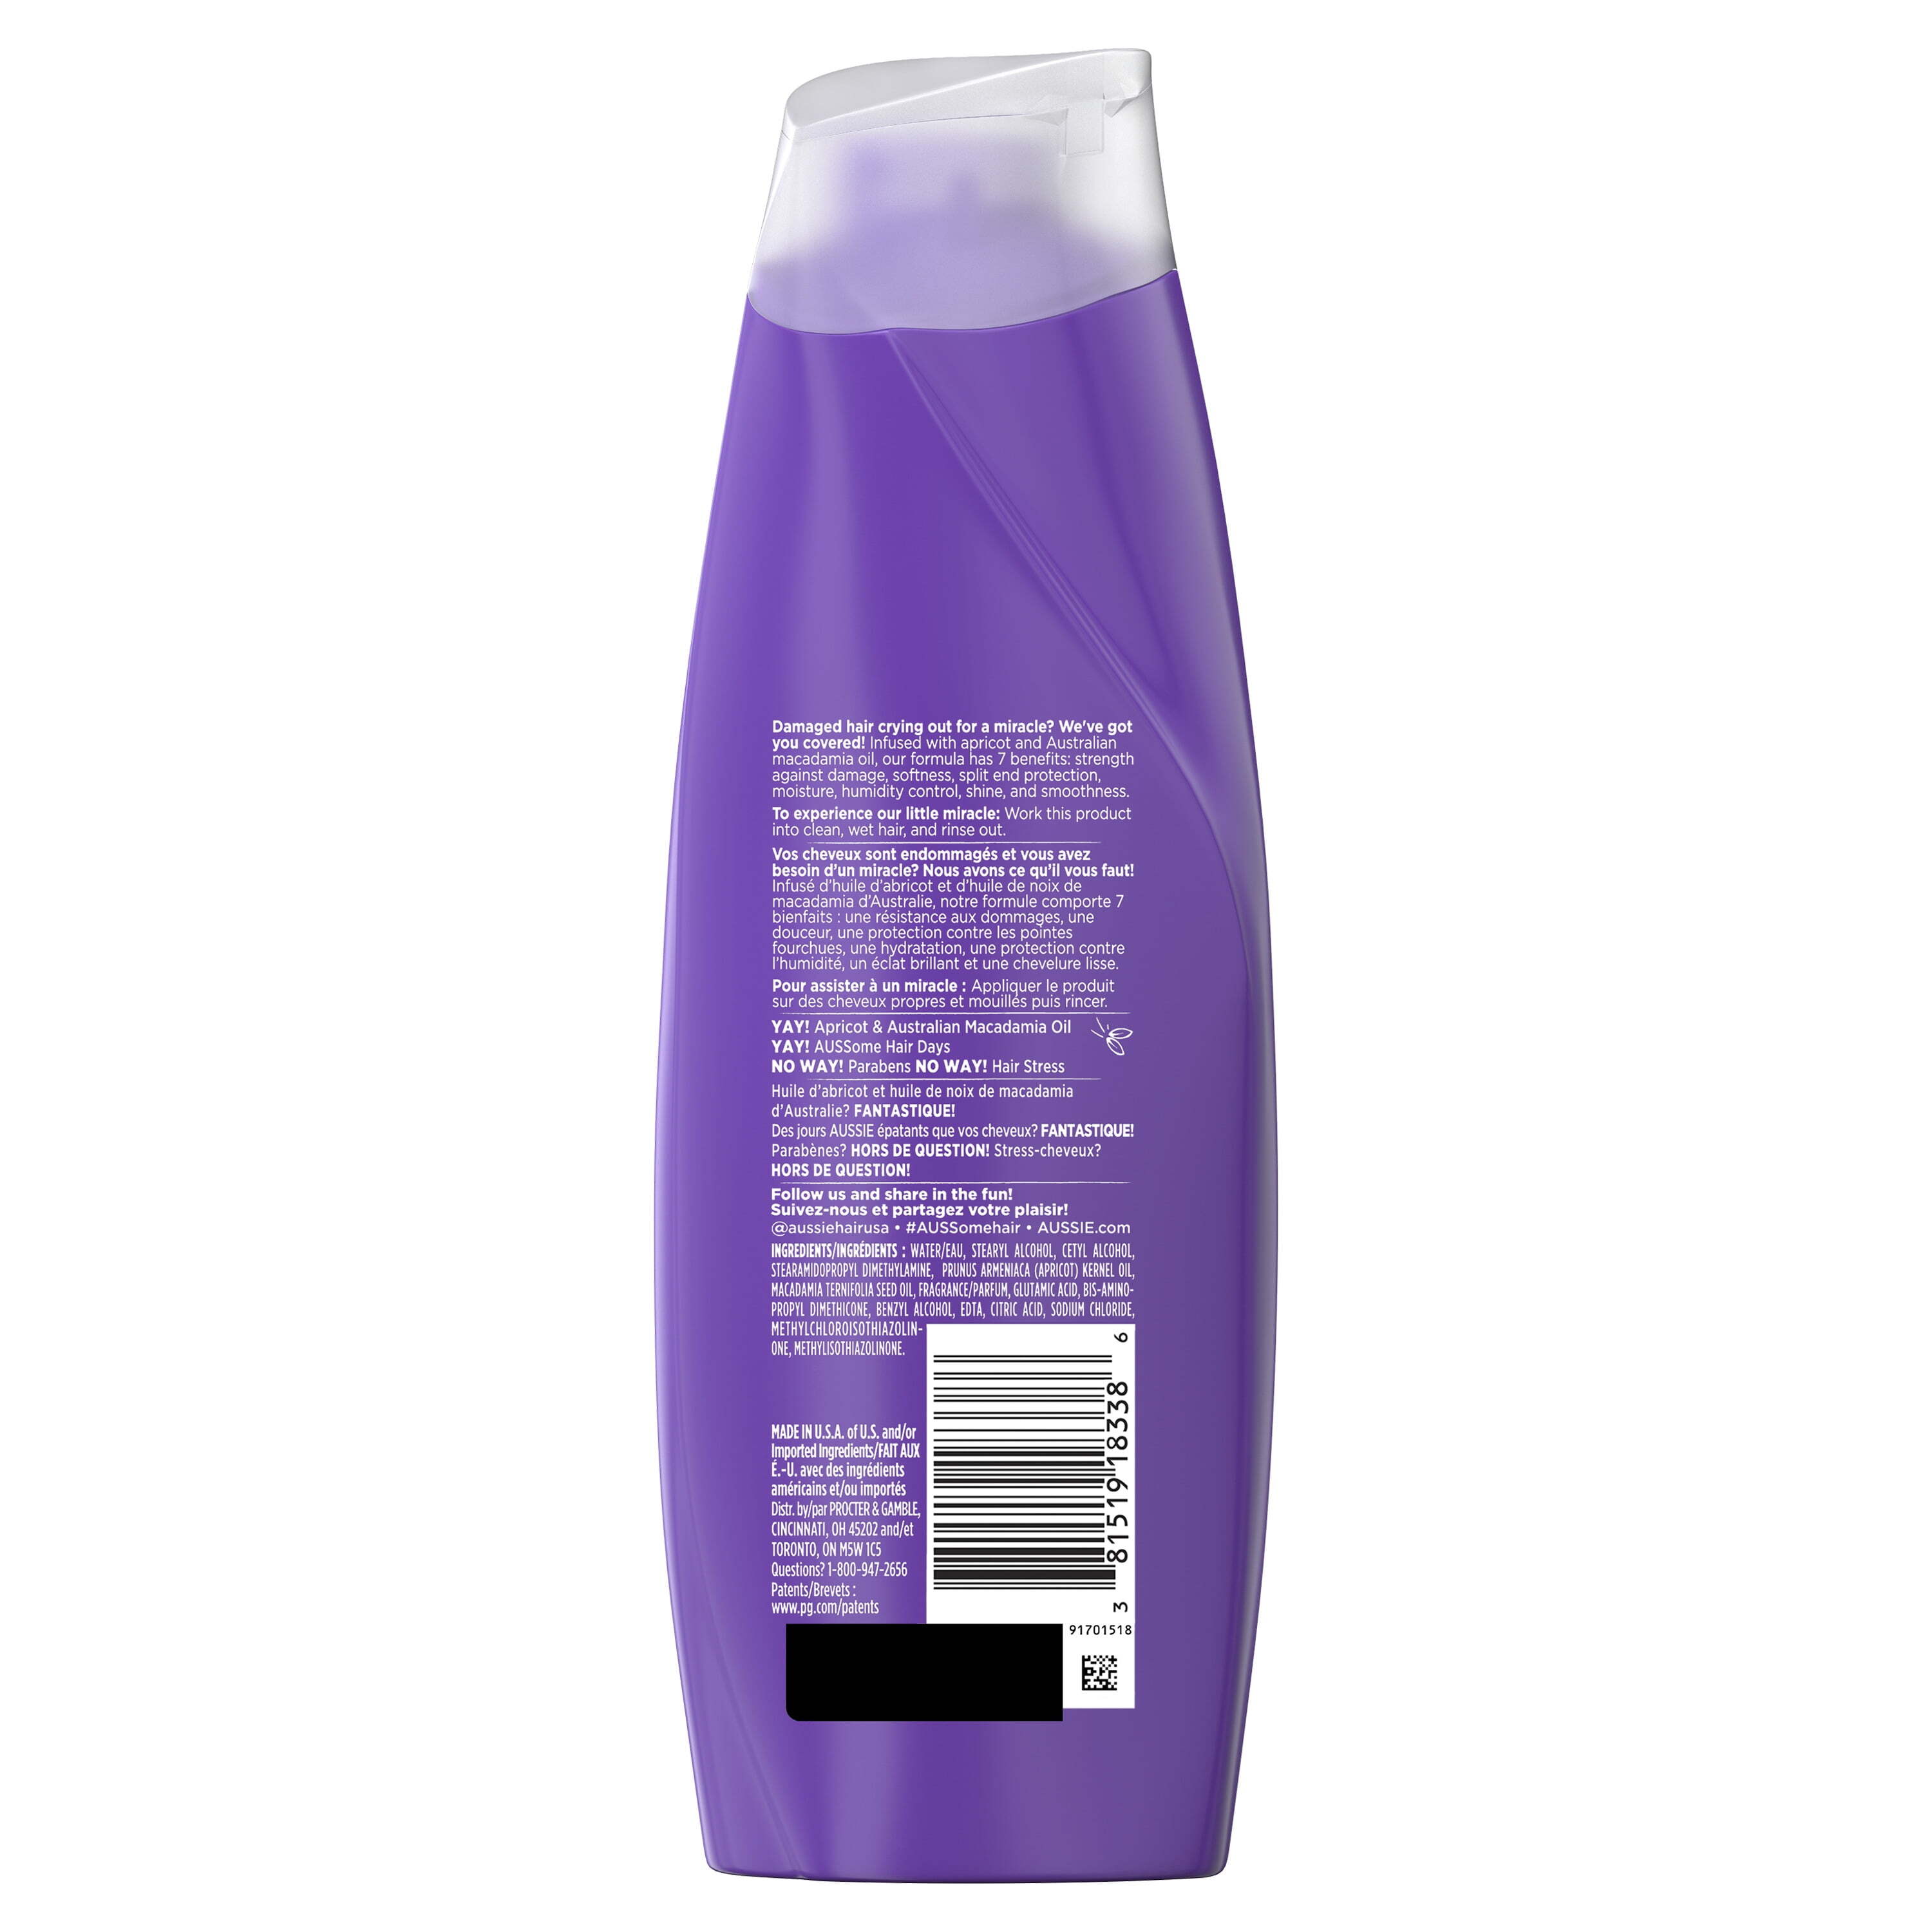 Aussie Total Miracle Conditioner for Damaged Hair, 12.1 fl oz - image 2 of 9